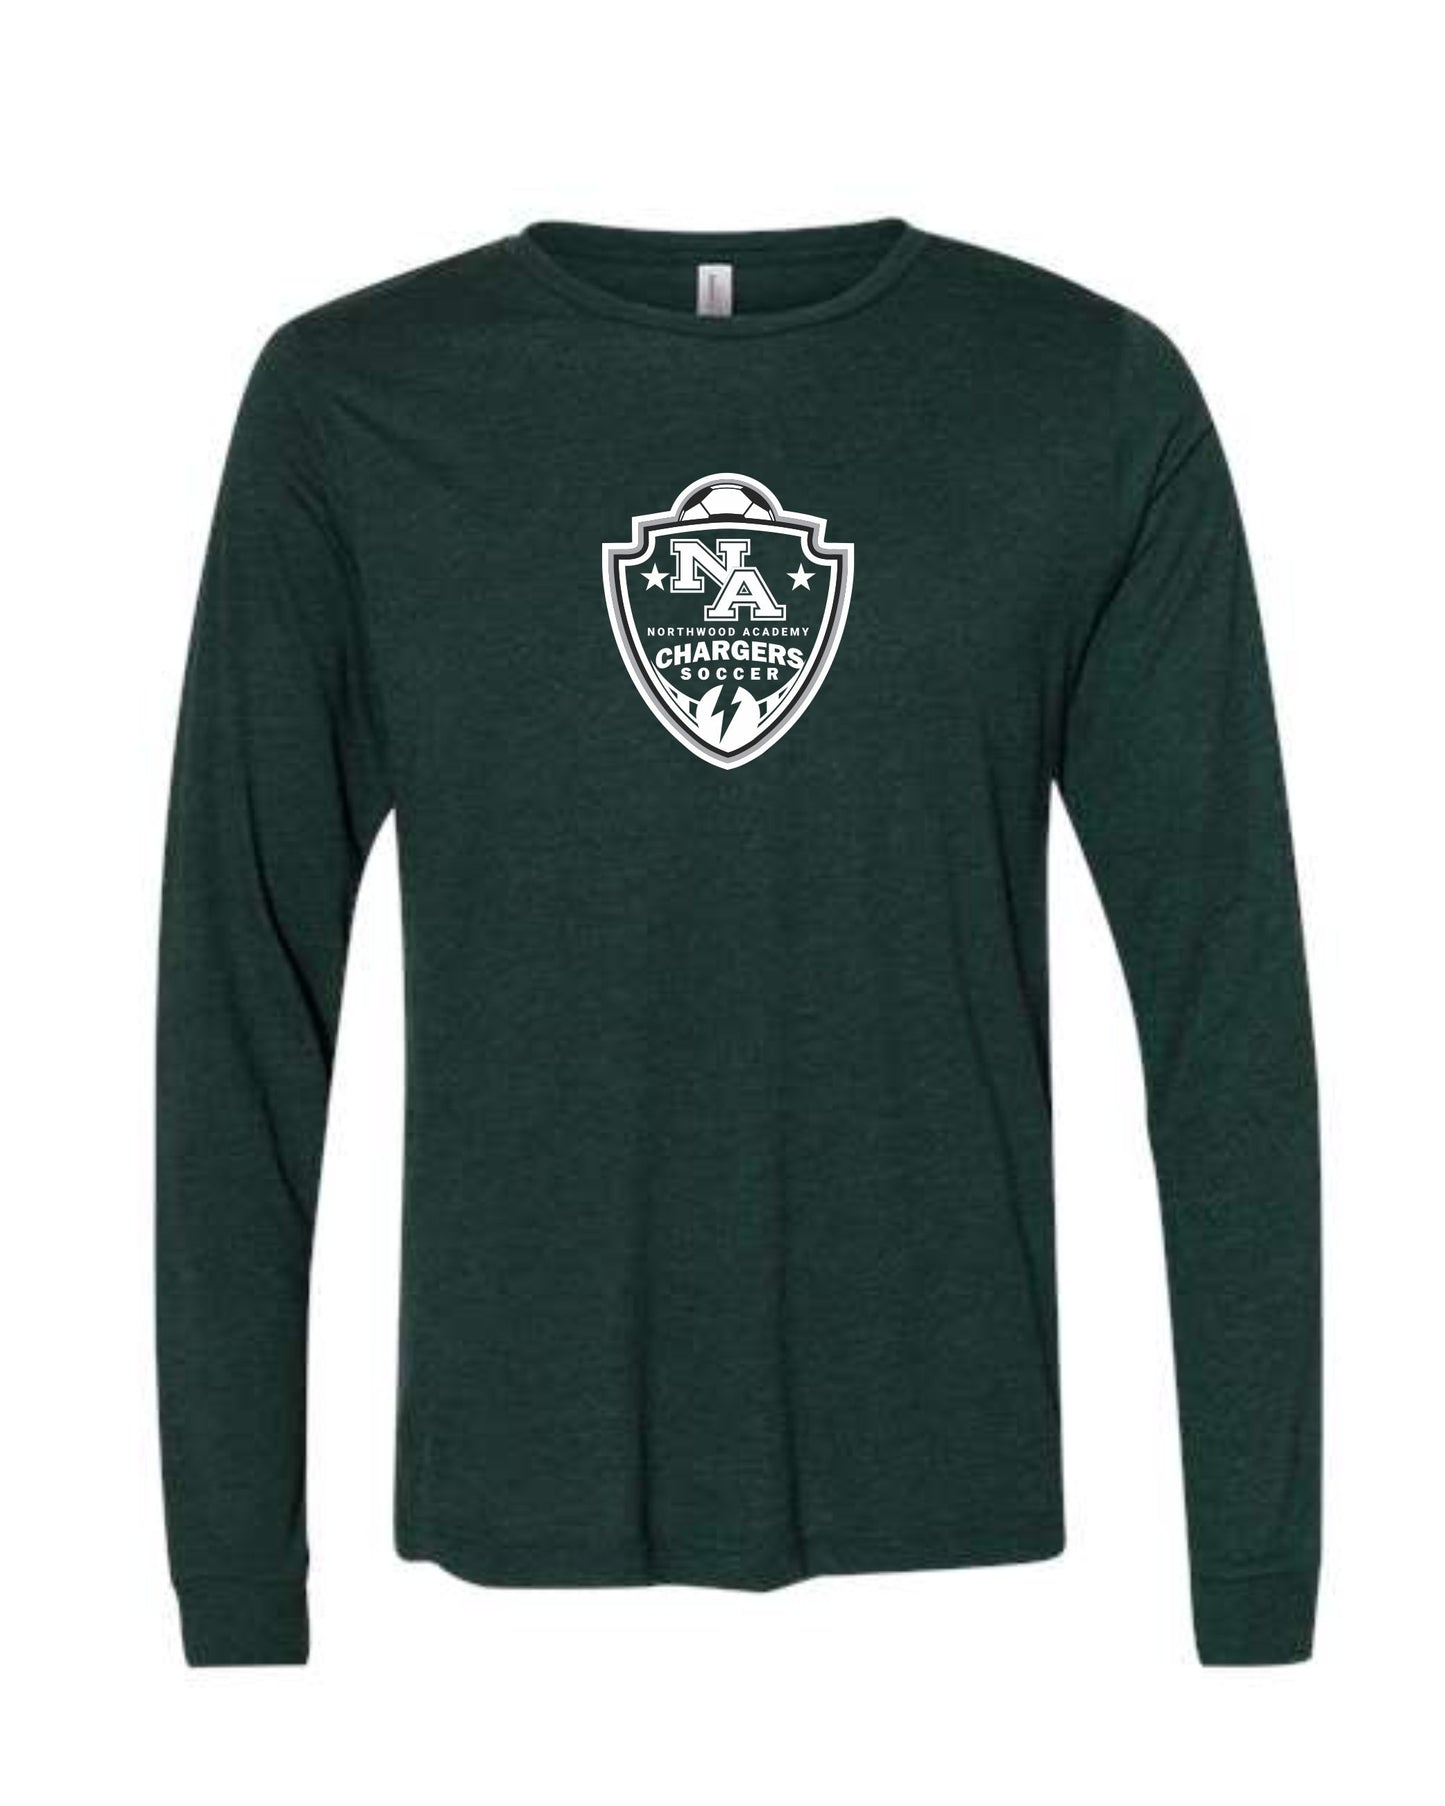 Long Sleeve Soccer Tee (not approved for school wear)